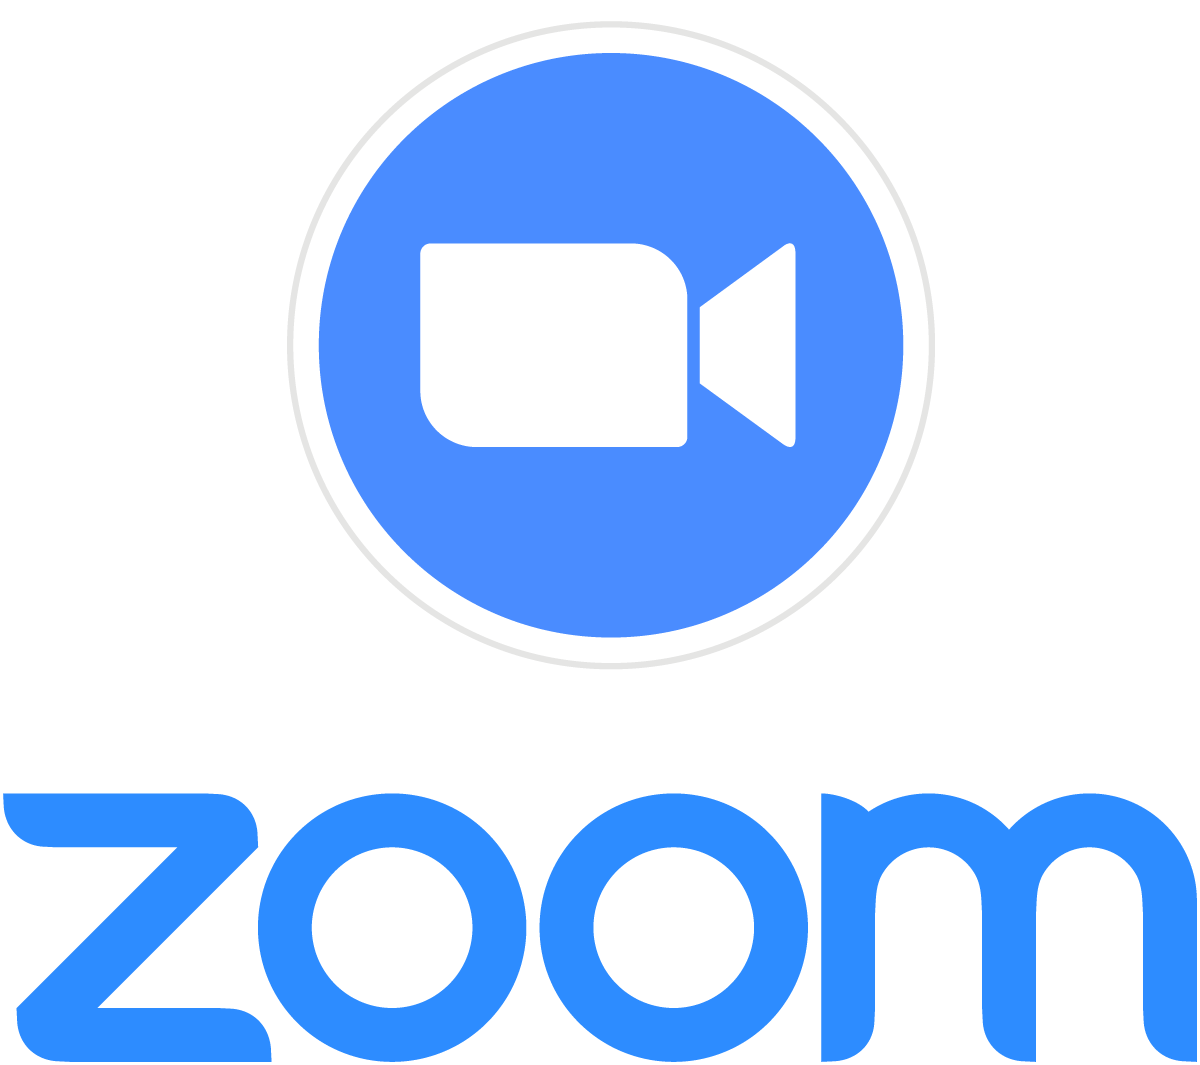 Zoom-Logo-PNG-High-Quality-Image.png